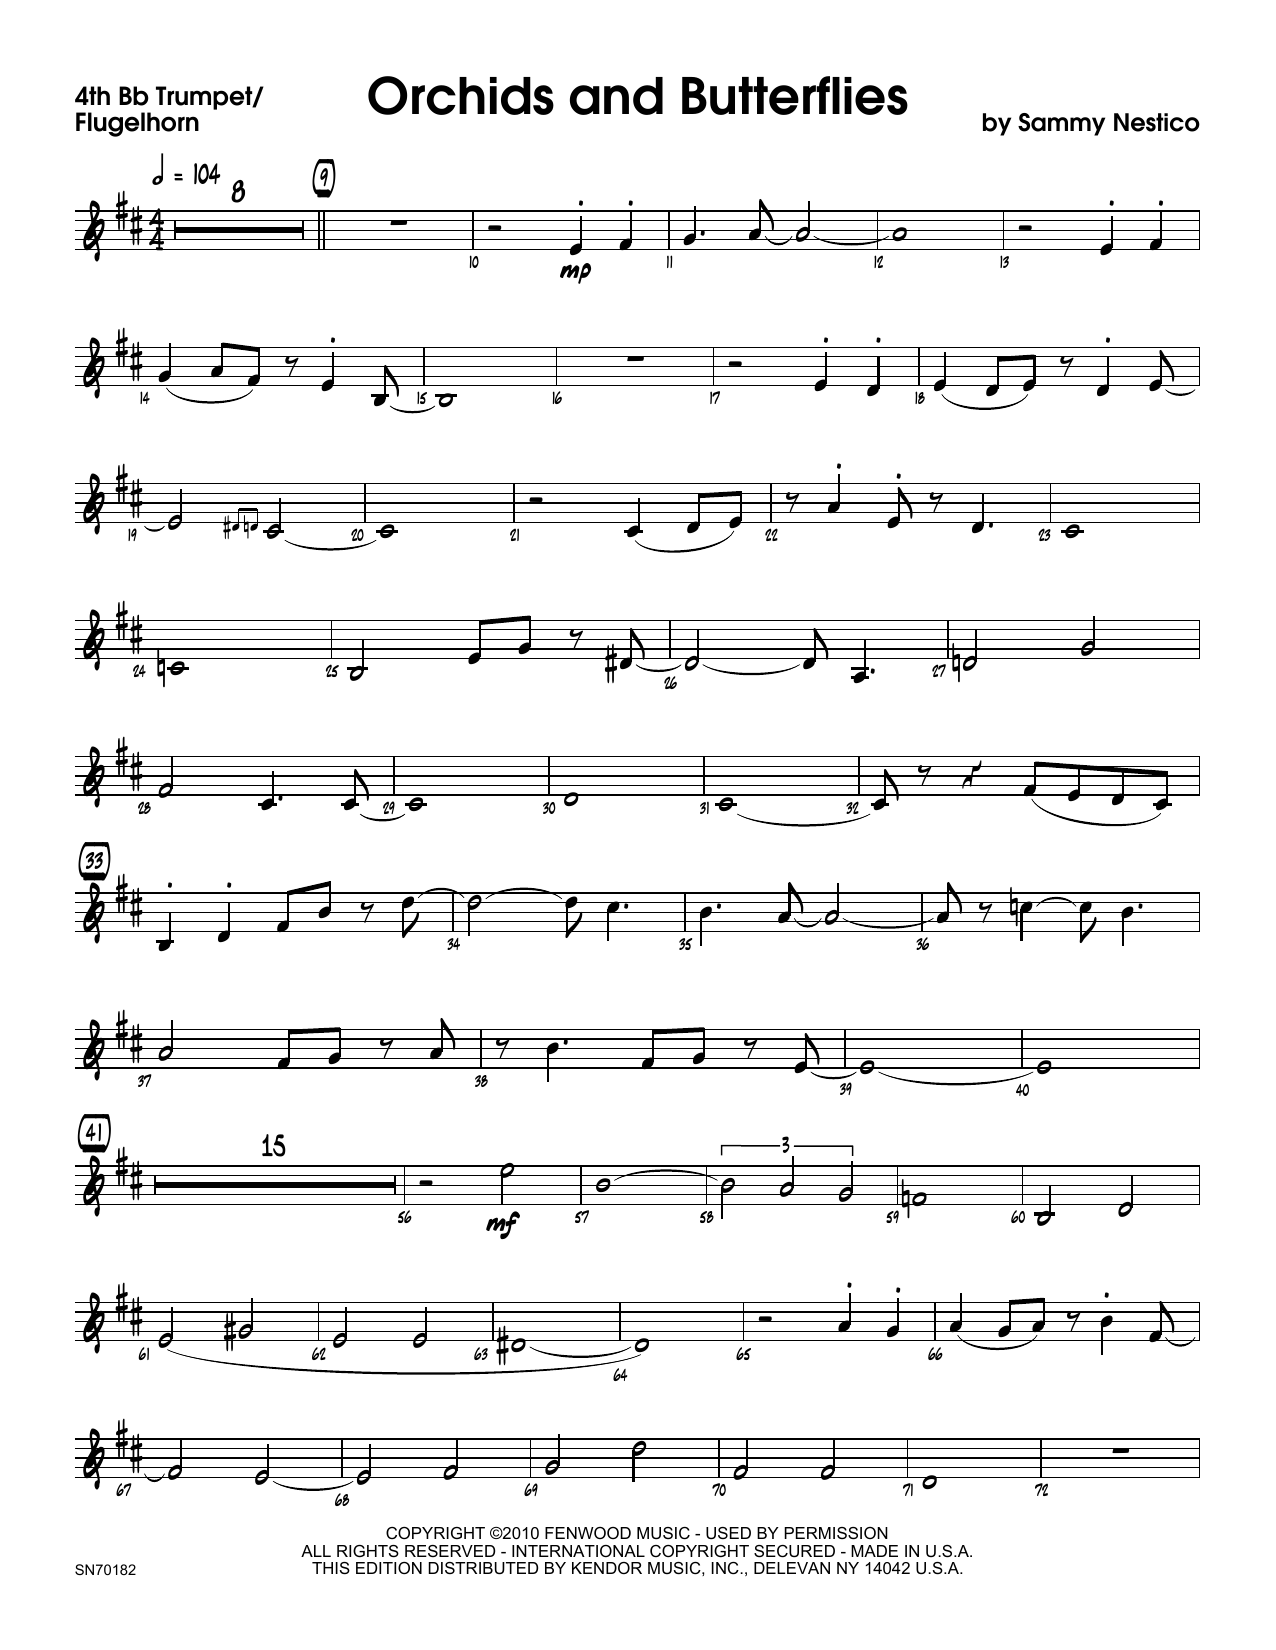 Download Sammy Nestico Orchids And Butterflies - 4th Bb Trumpe Sheet Music